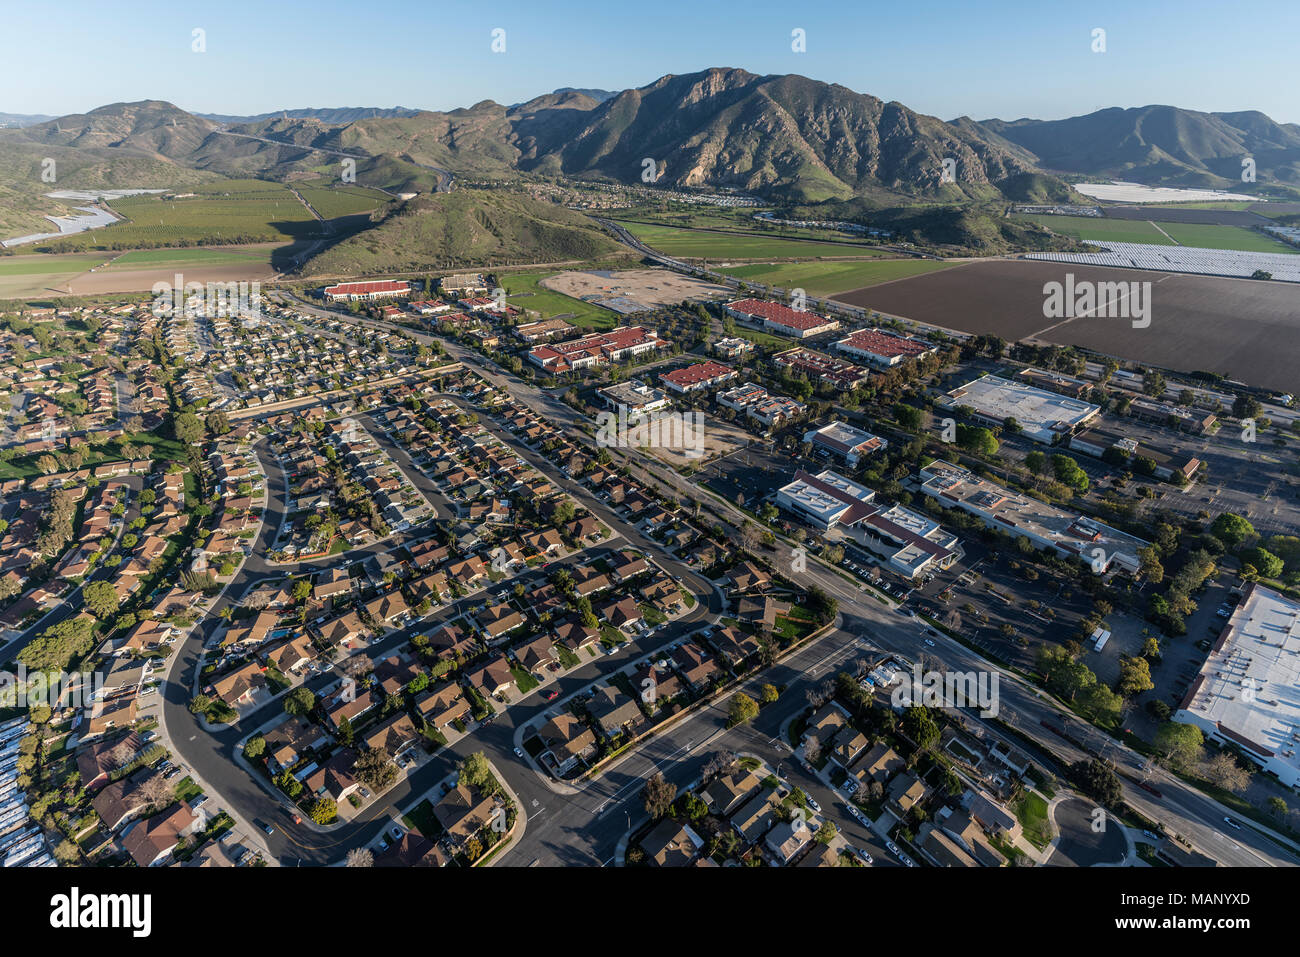 Aerial view of Camarillo homes, business and farms in Ventura County, California. Stock Photo